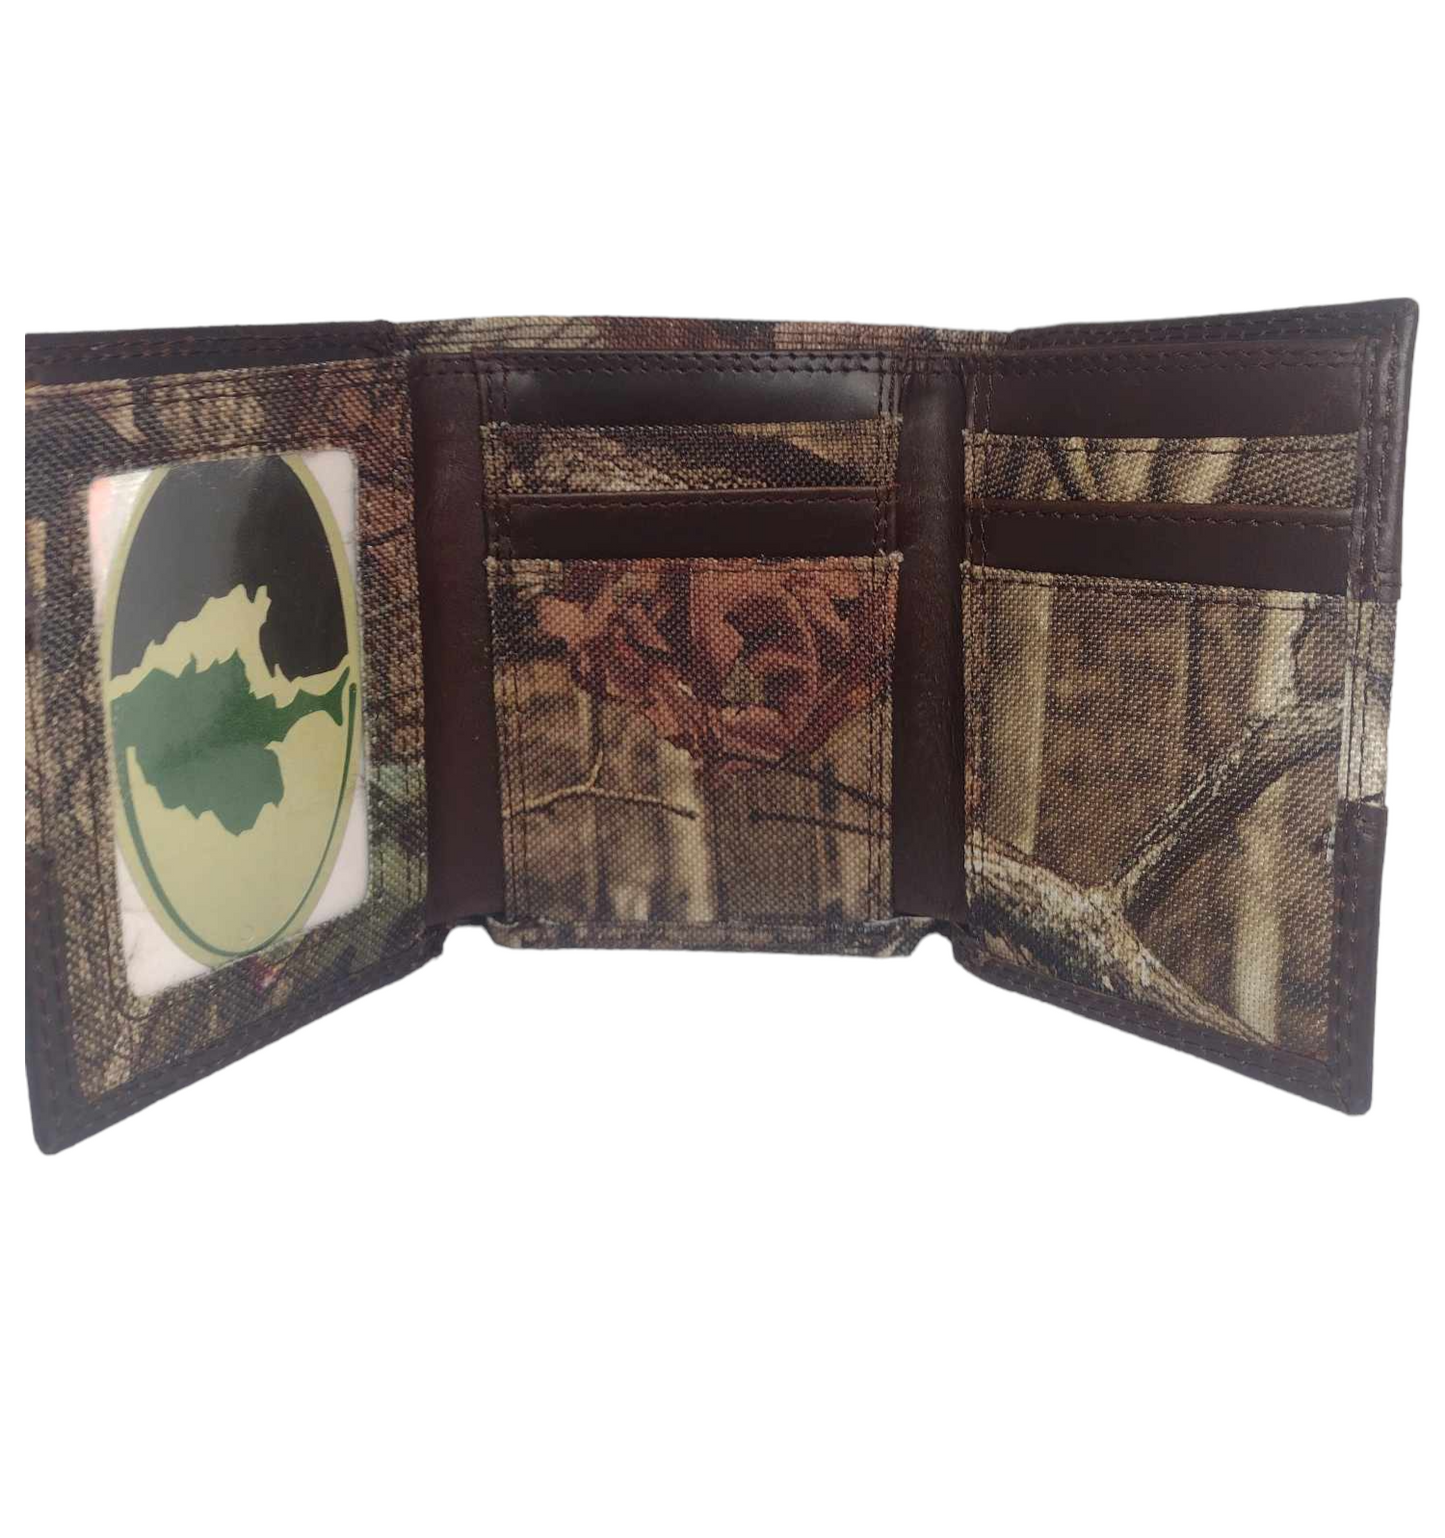 Florida Gators Mossy Oak Nylon and Leather Trifold Concho Wallet